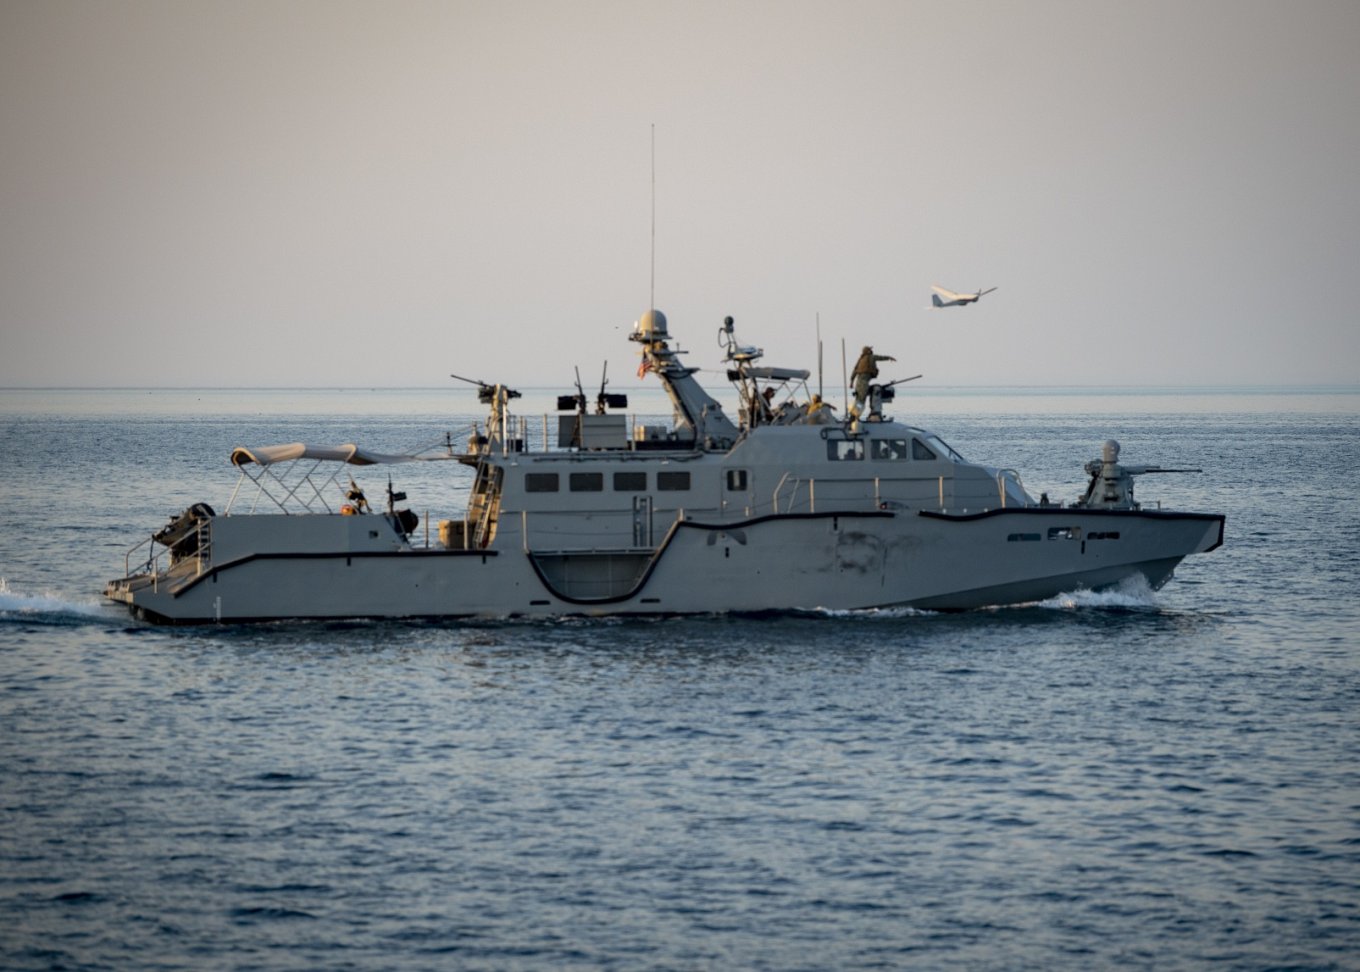 Military exercises on the Mark VI patrol boat Defense Express Ukraine already Got Defiant Patrol Boats, What Happened to “Unneeded” Mark VI Patrol Boats